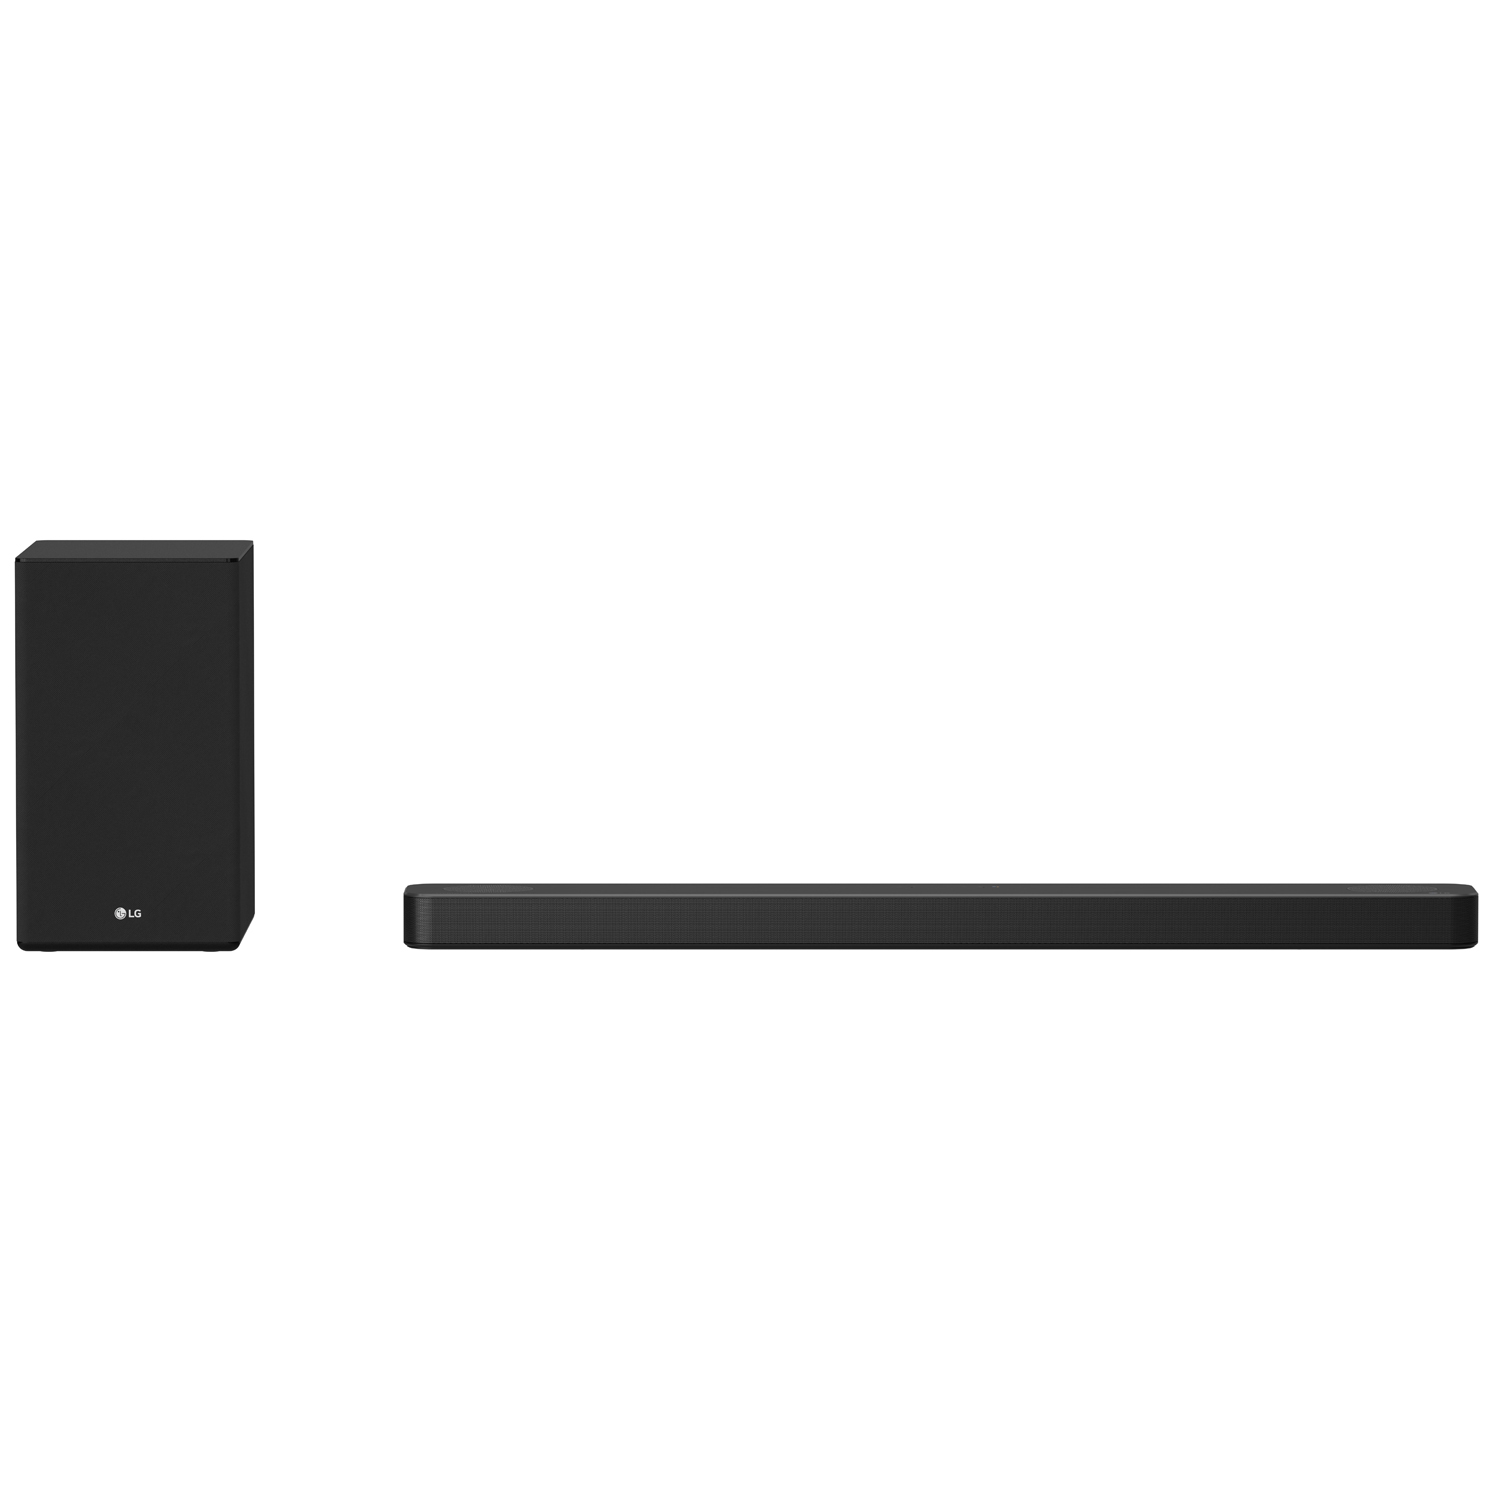 LG SN8YG 3.1.2ch Sound Bar w/ Meridian, Dolby Atmos, DTS:X 3D Surround Sound + Wireless Subwoofer Bundle with 2x Deco Gear HDMI Cable + 1 Year Extended Coverage + Streaming Entertainment Software Kit - image 2 of 10